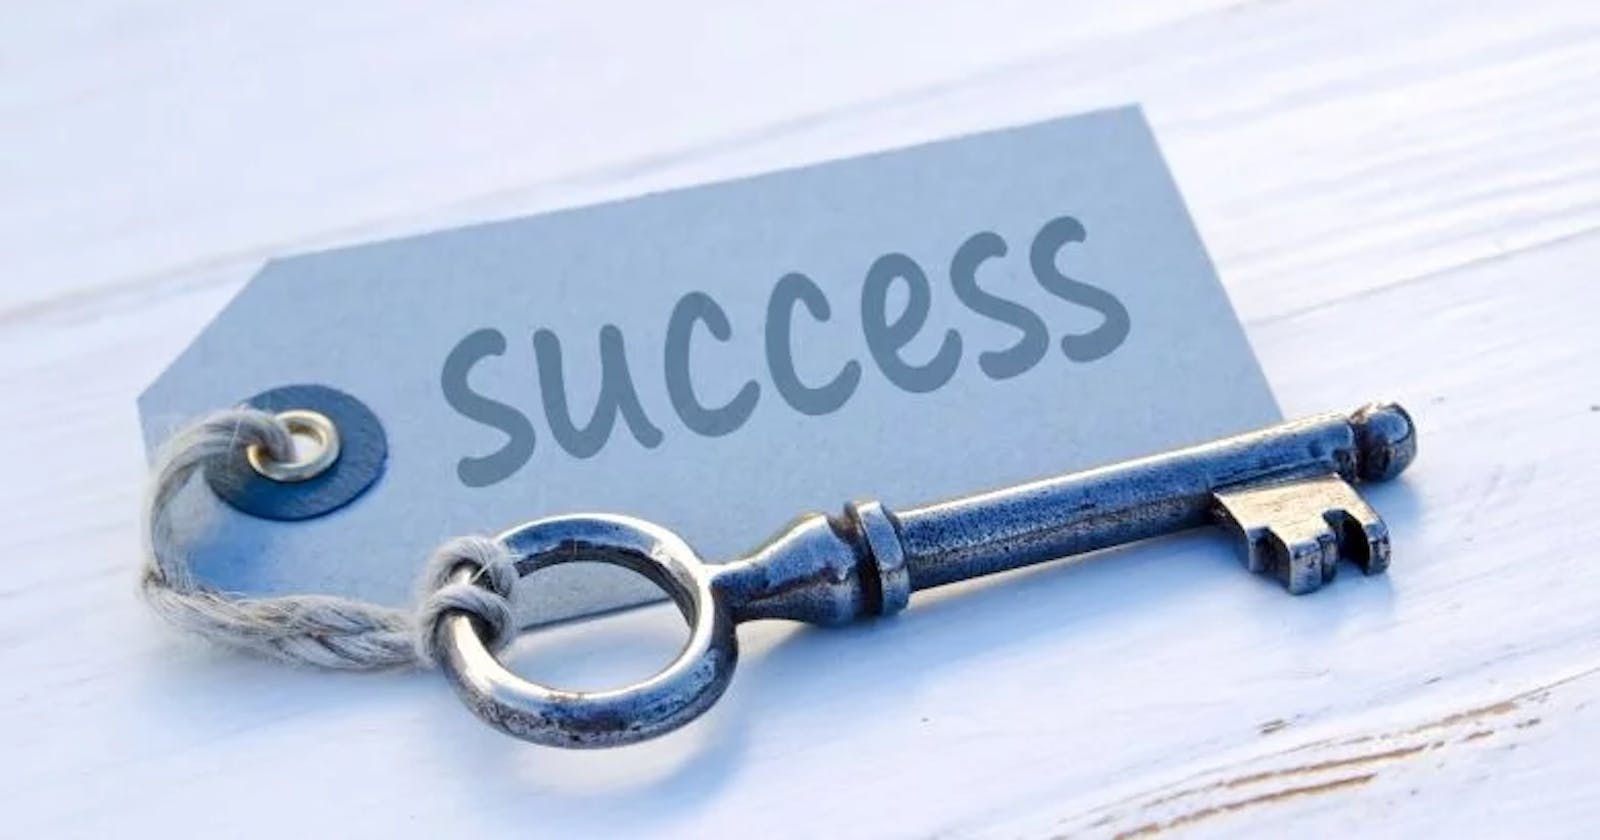 6 Keys for success in life: You have everything already which can make you successful